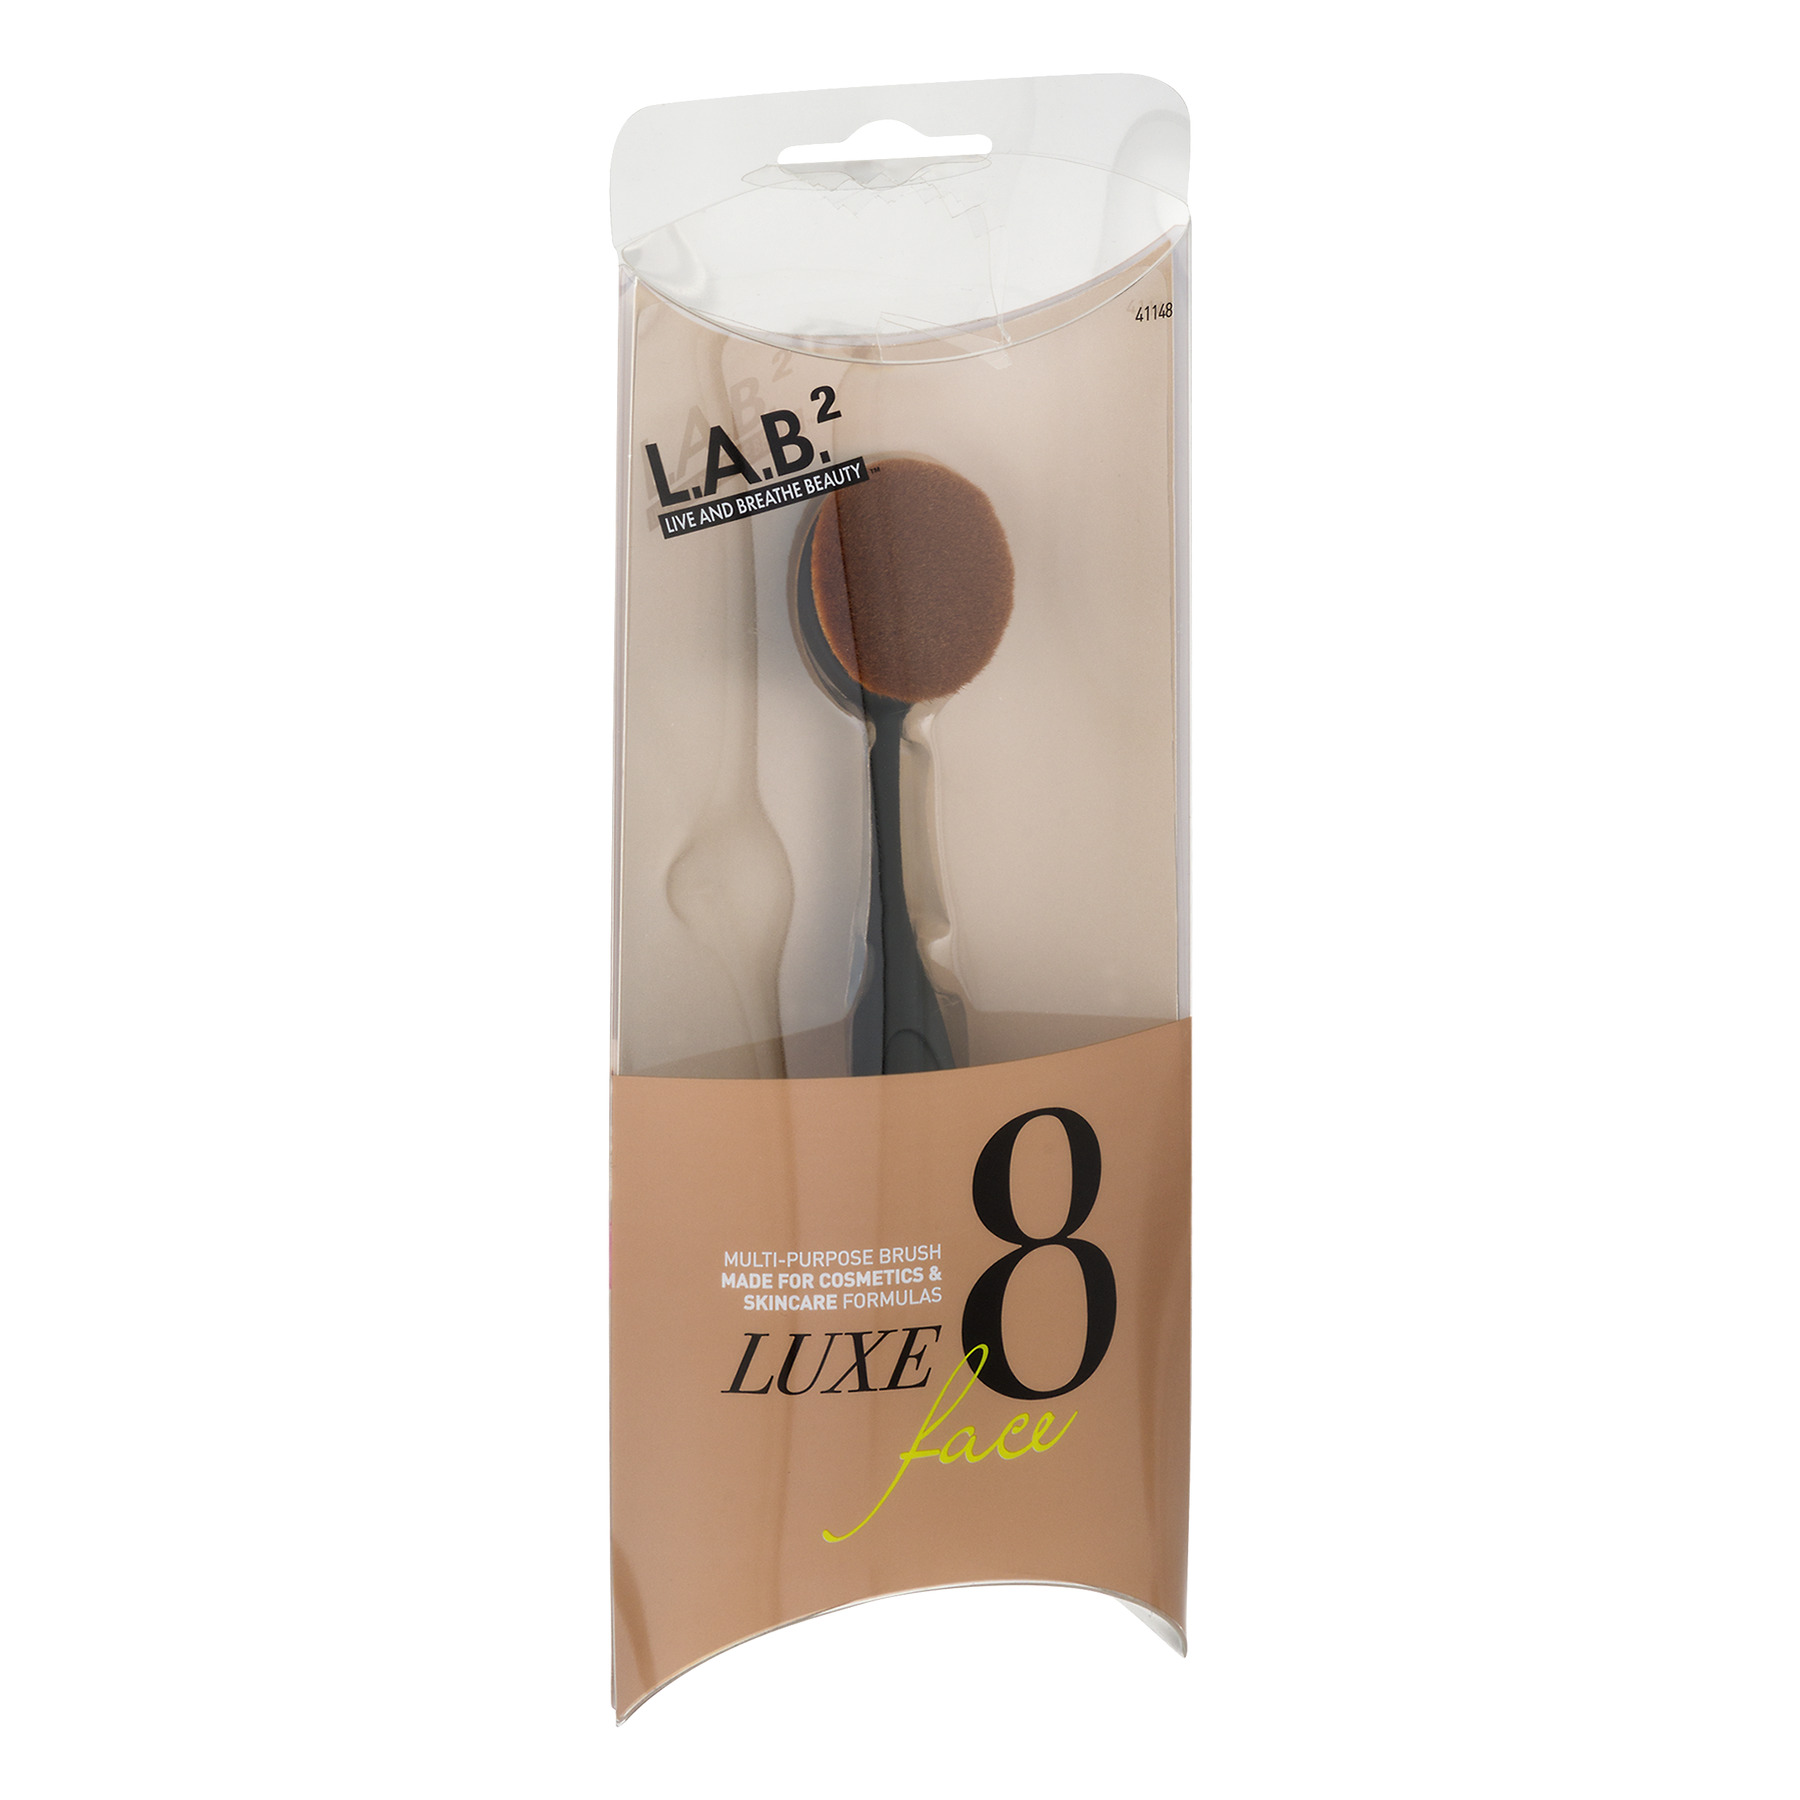 L.A.B.2 Luxe Oval Makeup & Skincare Brush, No. 8 for Face - image 2 of 2